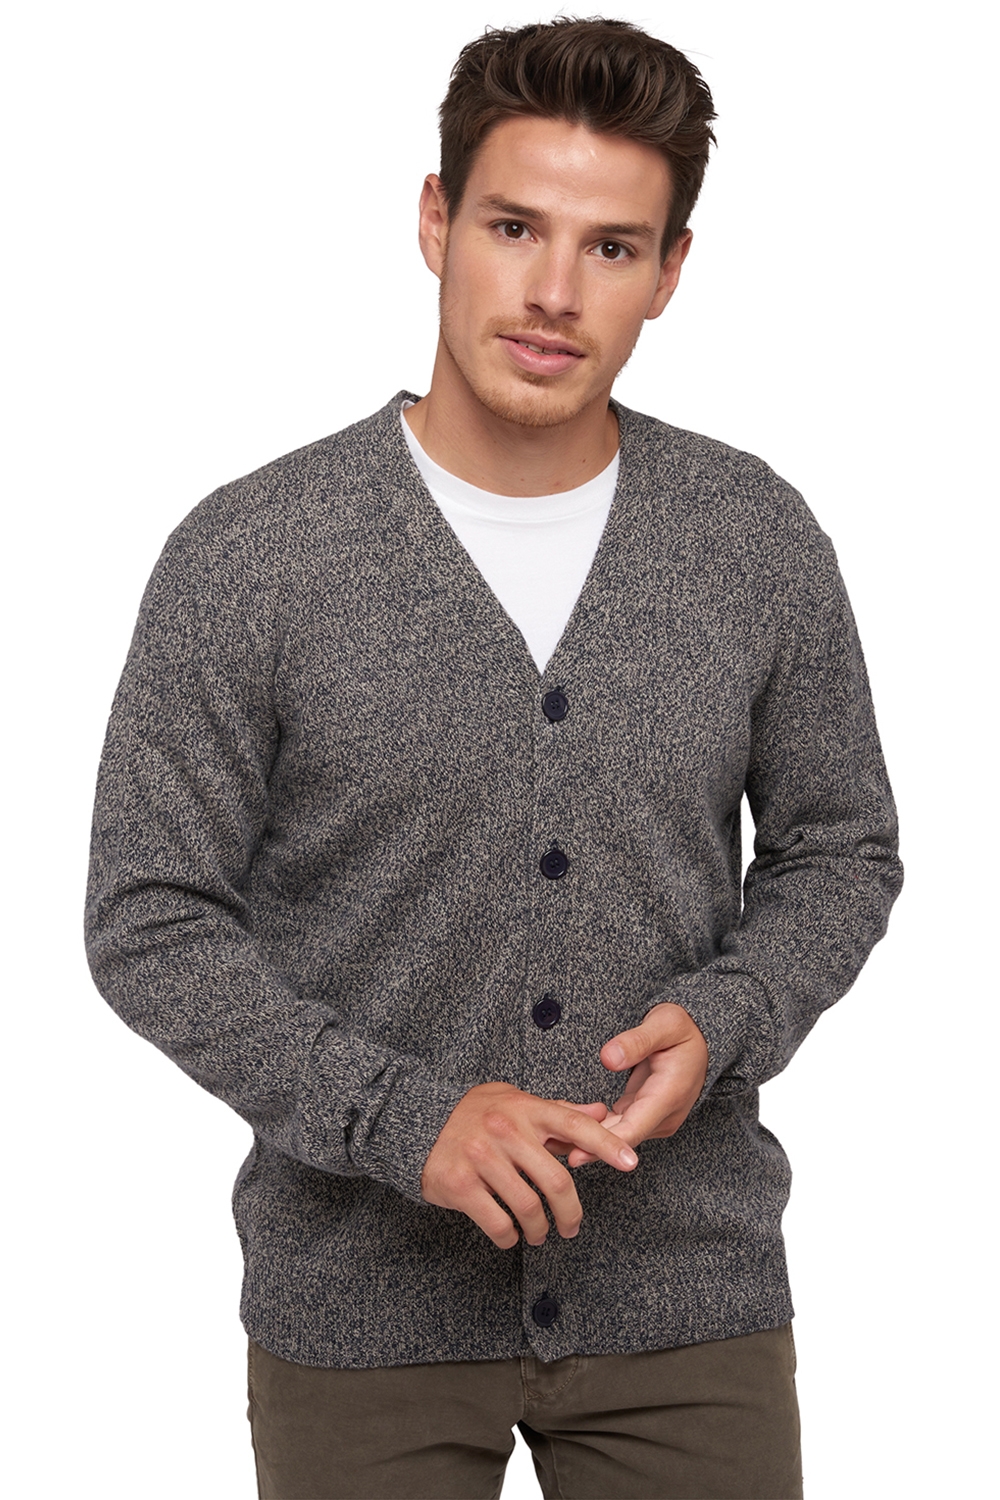 Chameau pull homme cameleon voyage s